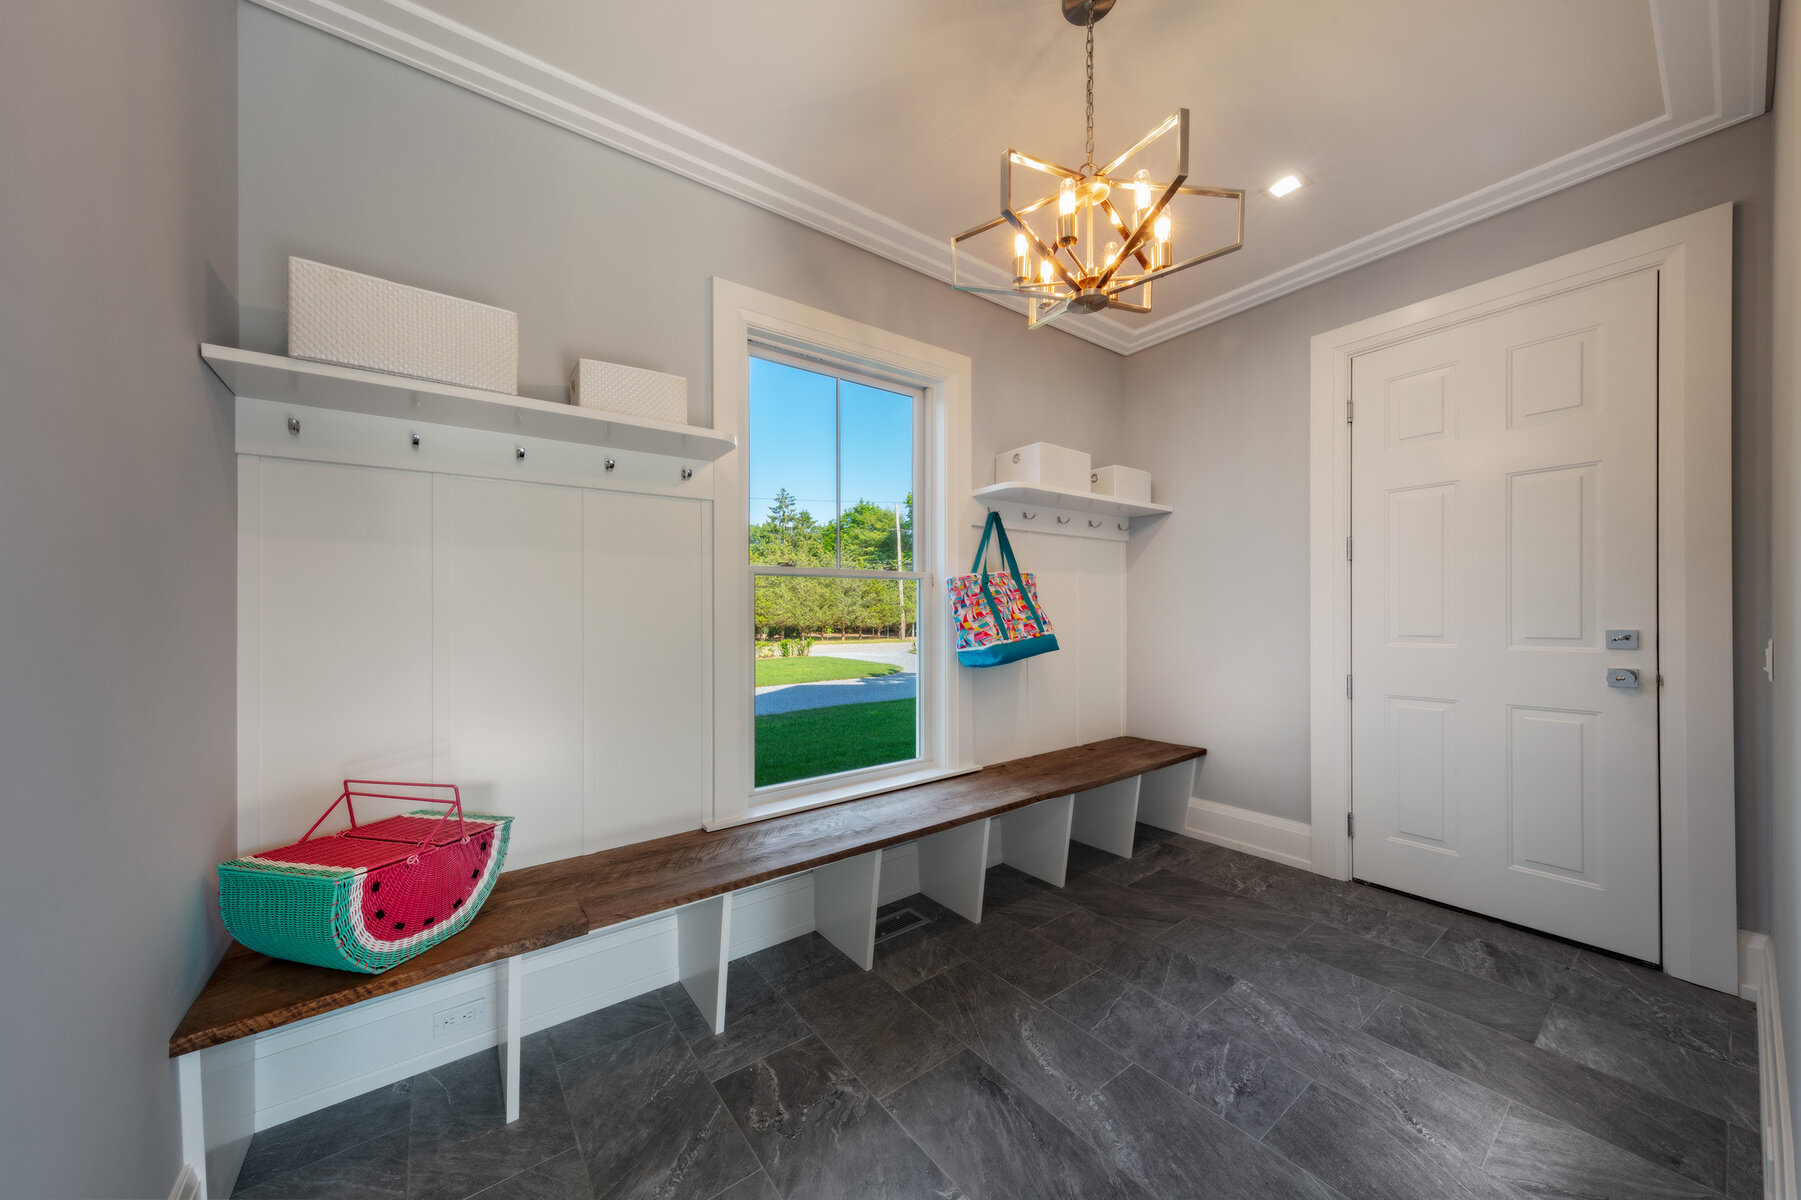 Westhampton luxury modular home new construction Signature Building Systems Mudroom Built-ins.jpg